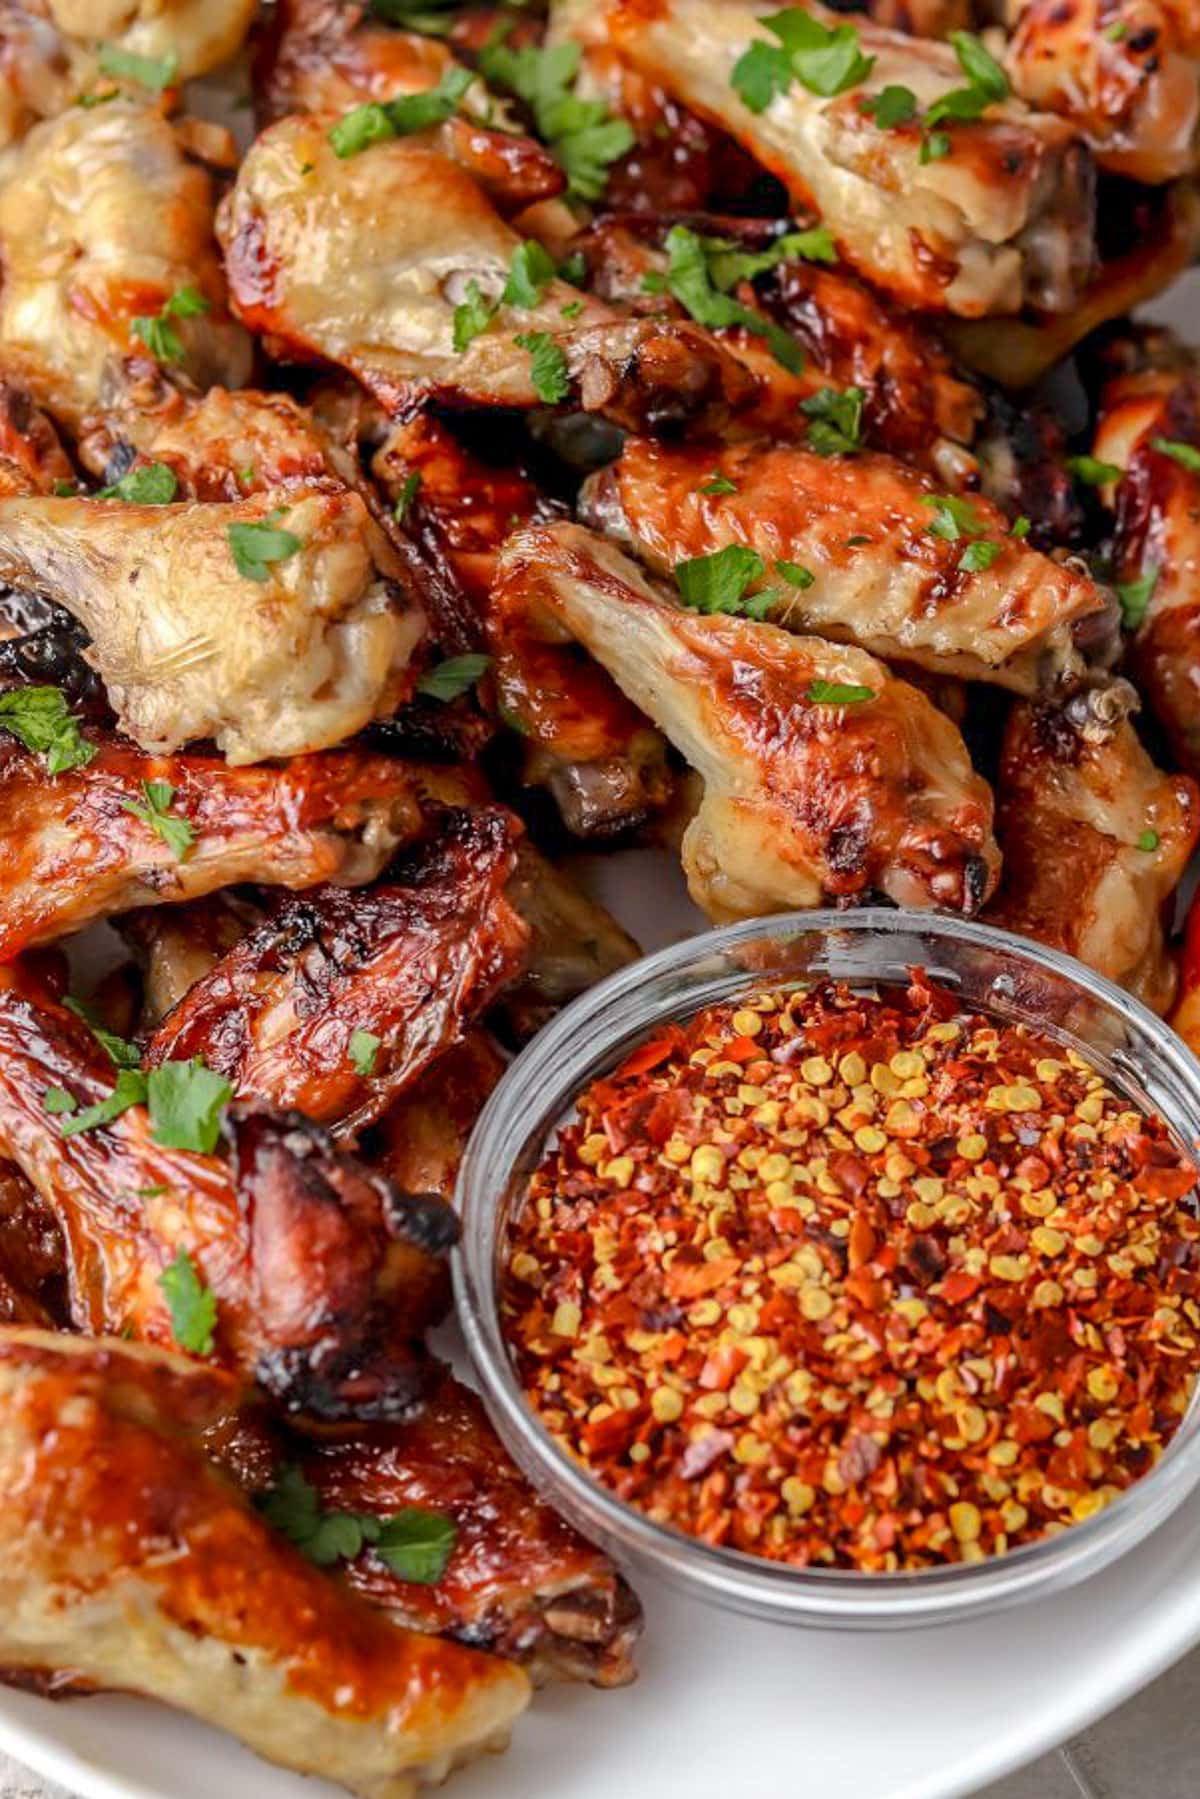 Juicy brined and cooked chicken wings piled on a platter next to a glass serving bowl of sauce with red pepper flakes.